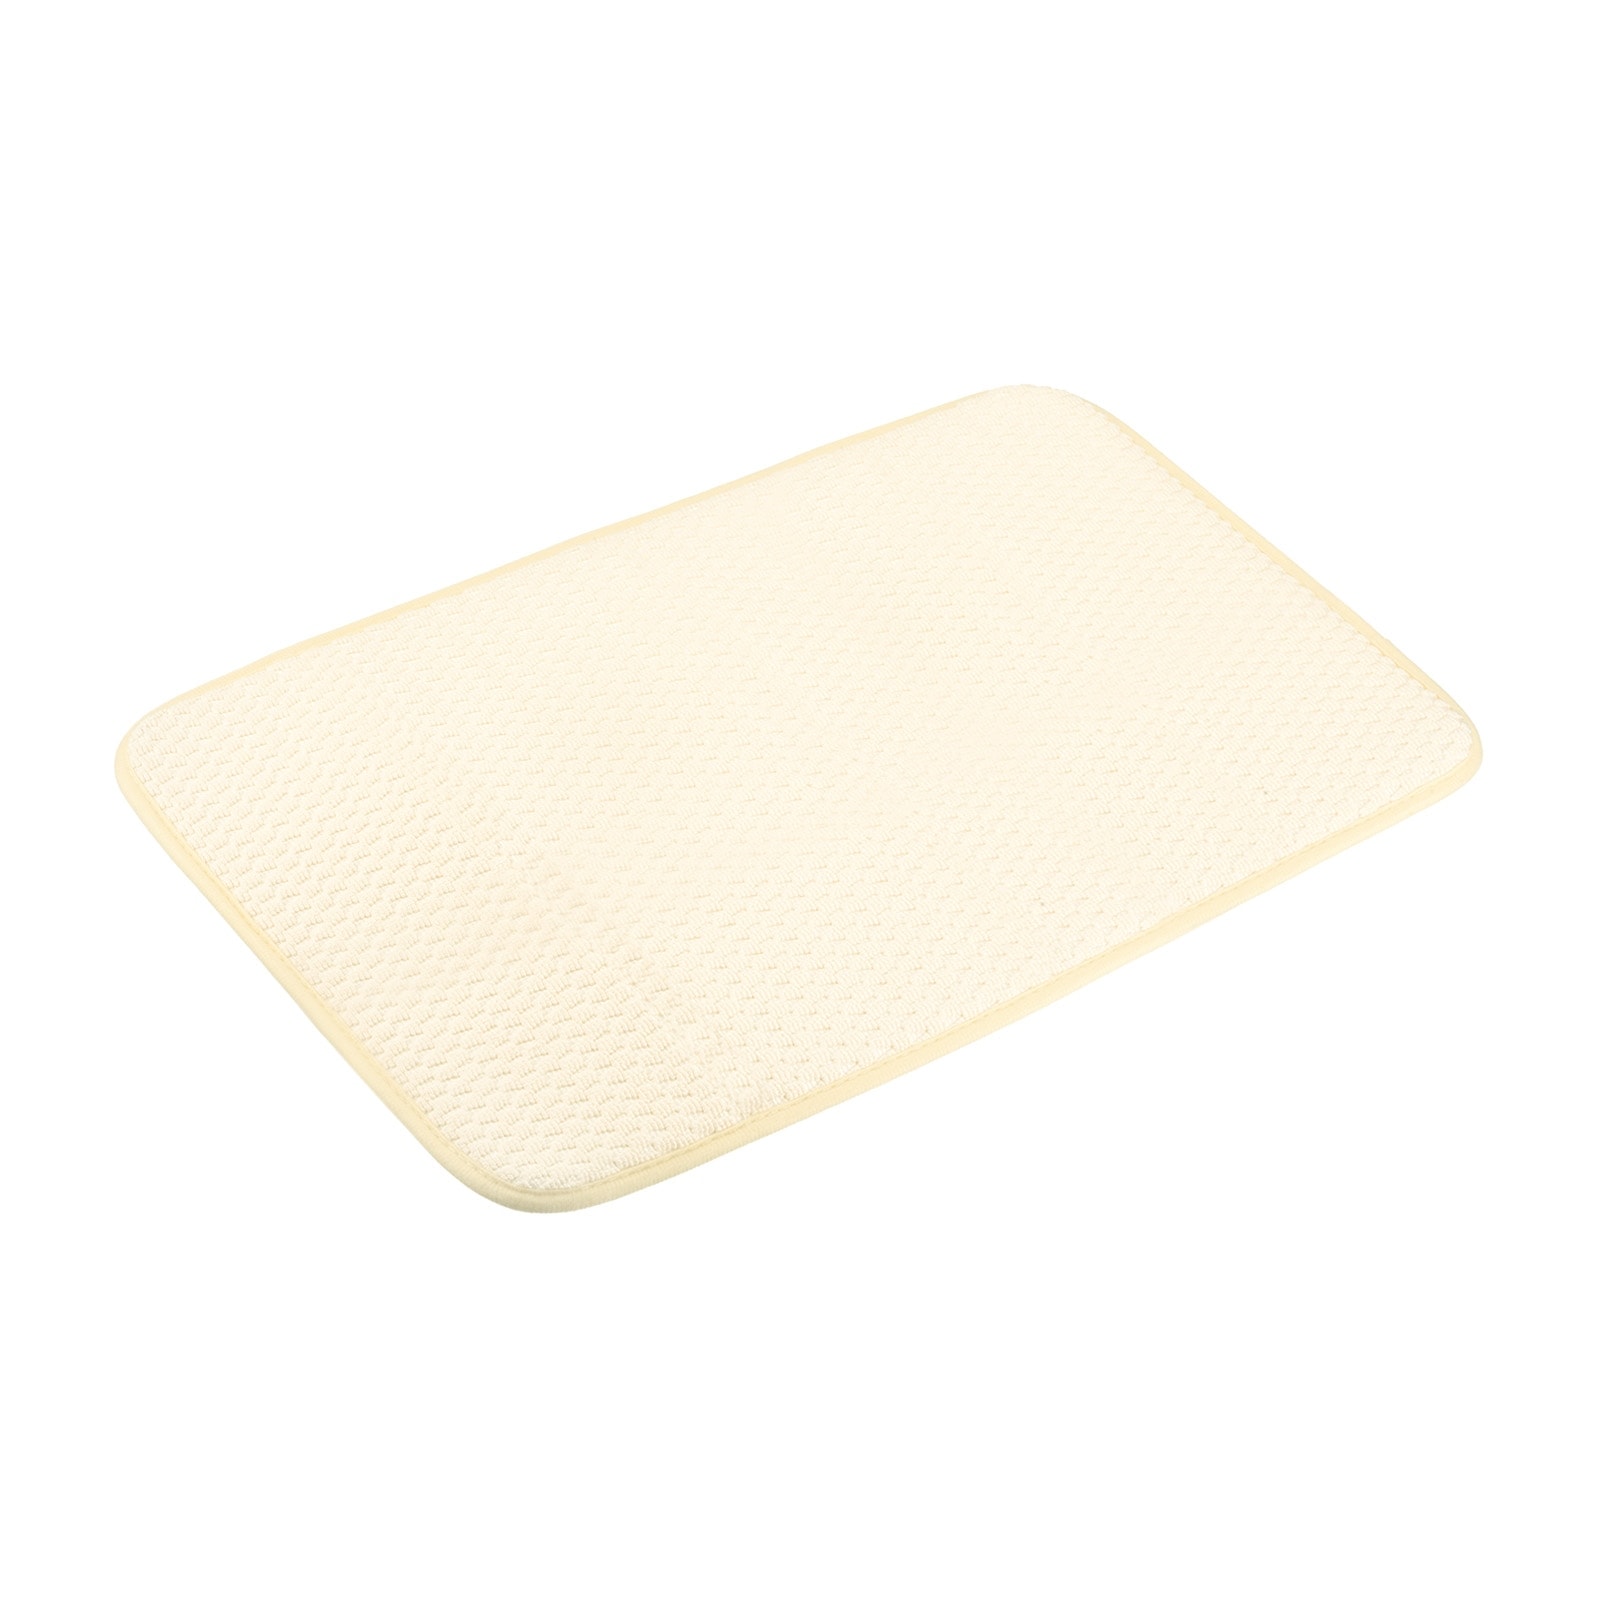 https://ak1.ostkcdn.com/images/products/is/images/direct/d9e05652855fcdcb04a9942df738a9638f999e05/2pcs-Dish-Drying-Mat-Ultra-Absorbent-Microfiber-Dish-Drainer-Pad-Yellow.jpg